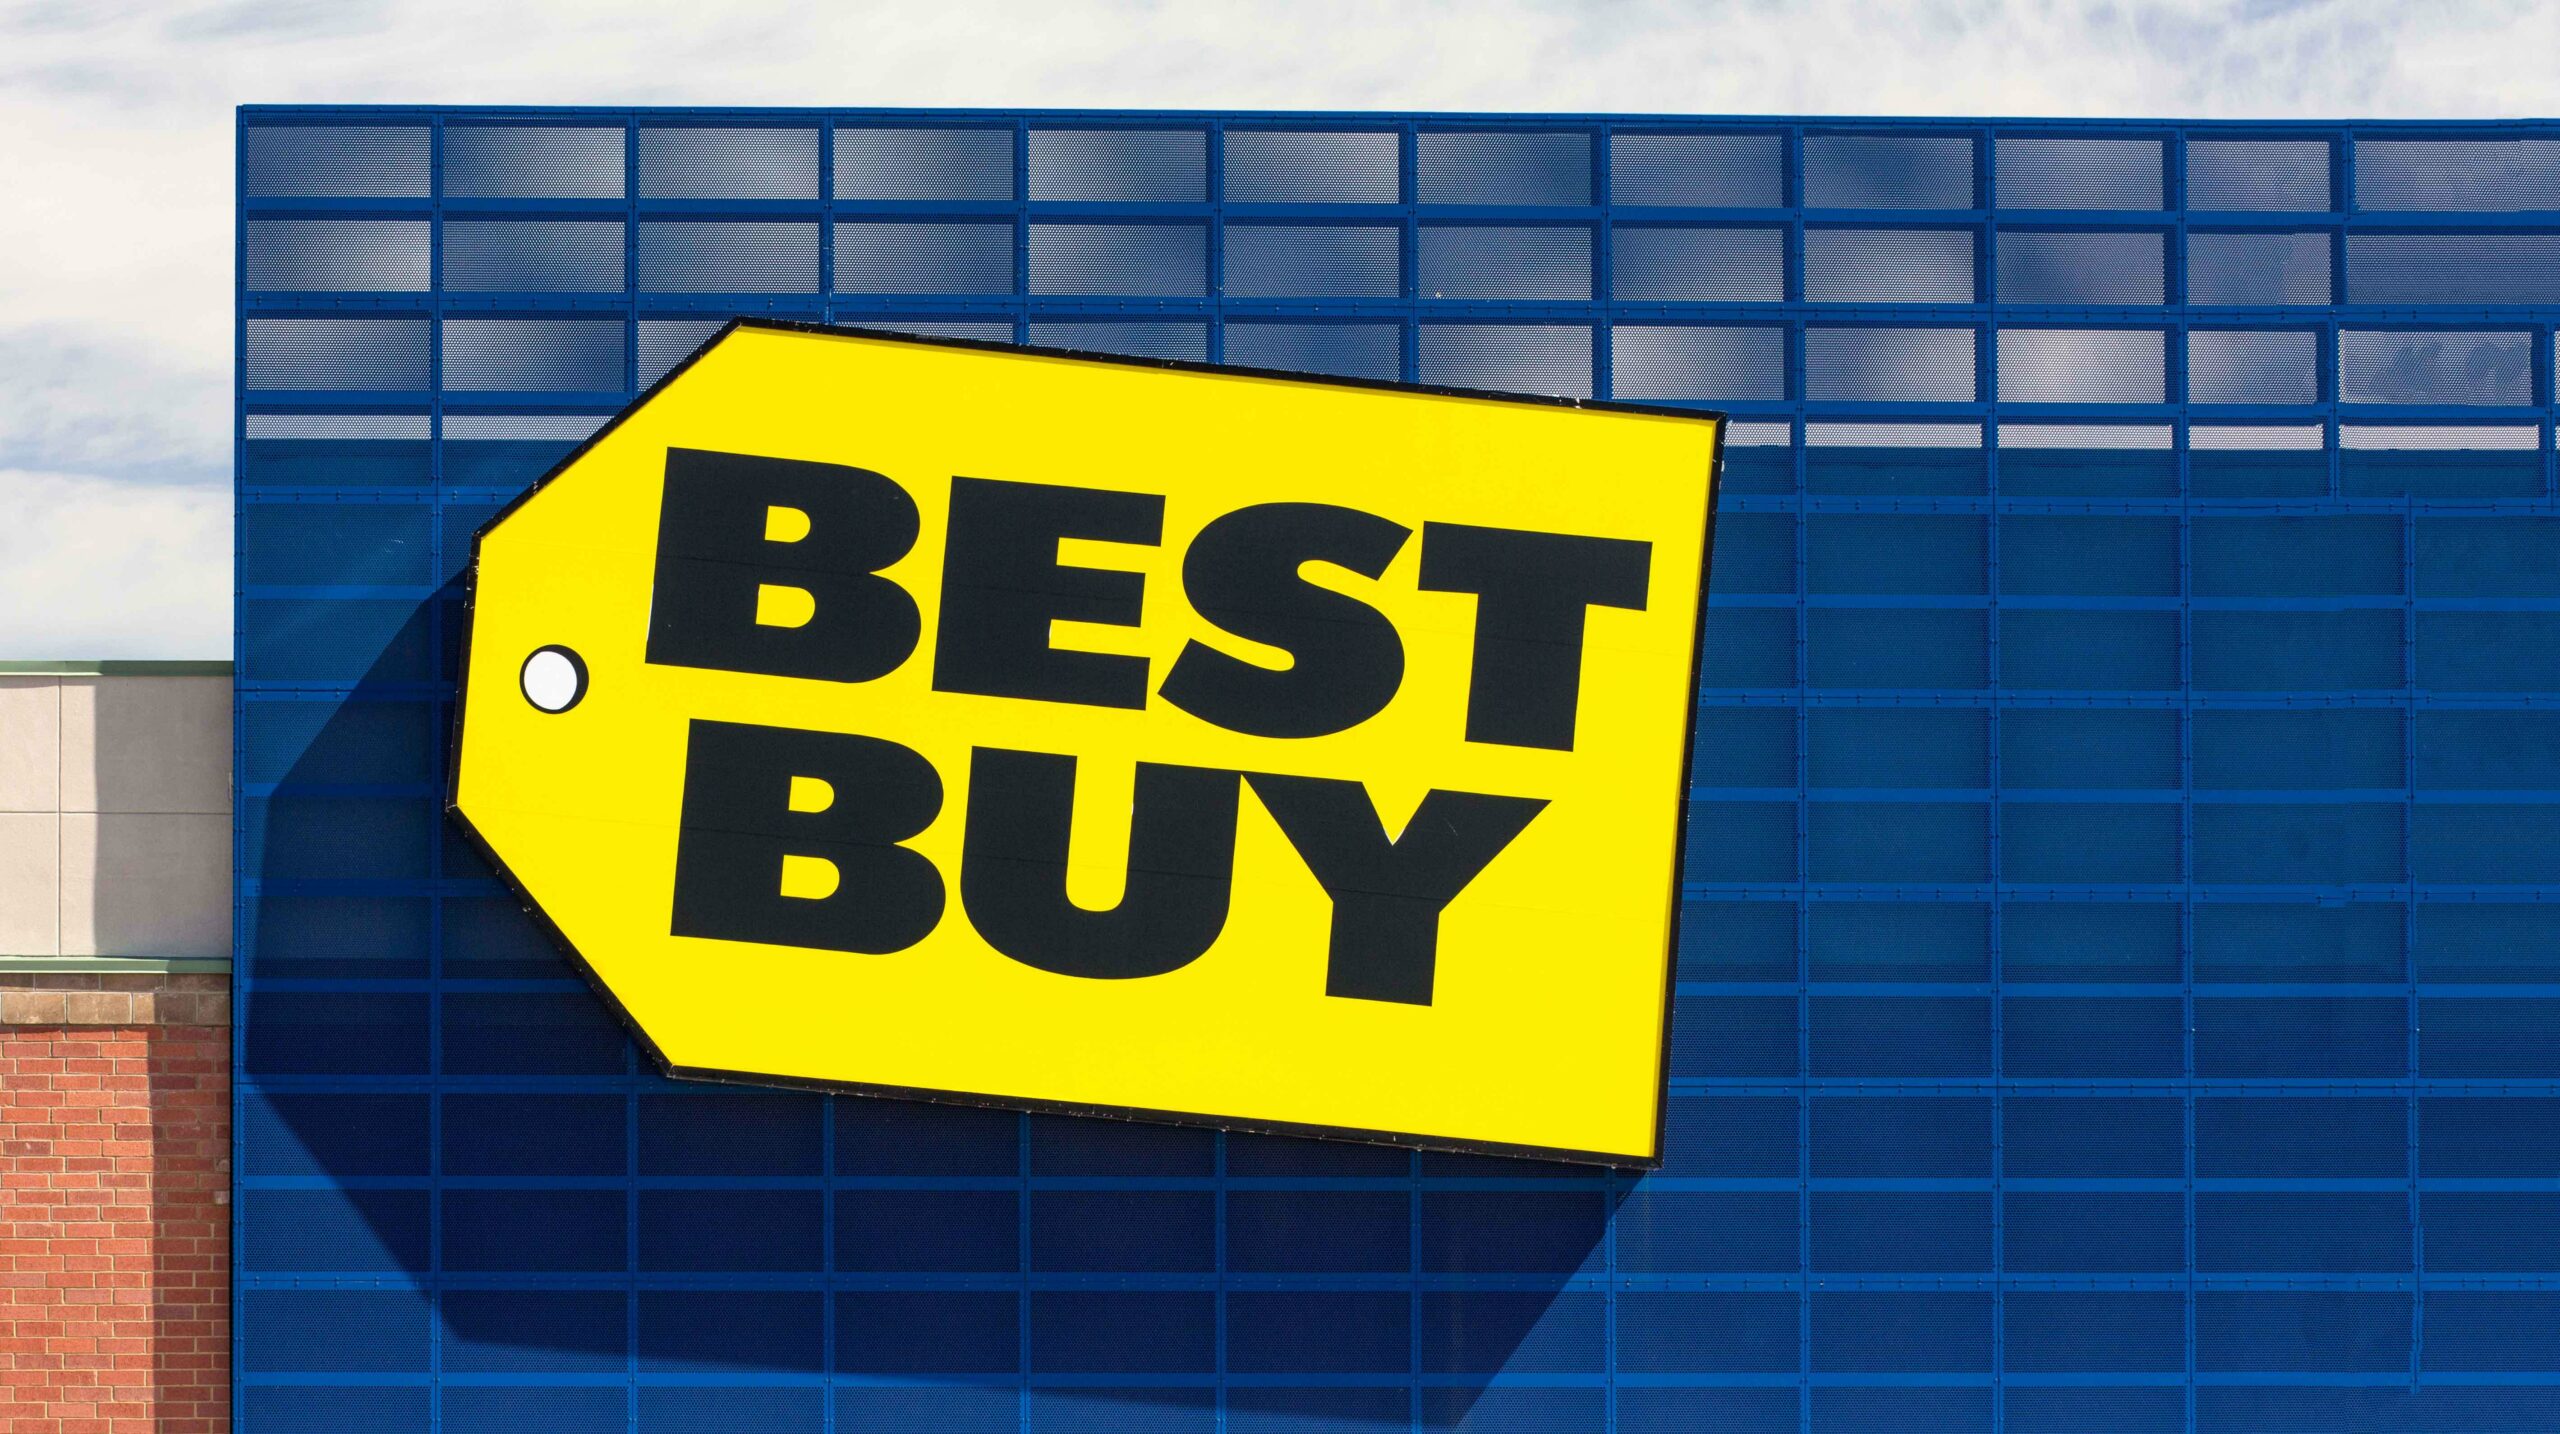 Best Buy Top Deals Jan 27-Feb 2: Galaxy Buds 2 Pro, Jbl Charge 5, Wd  External Hard Drive And More